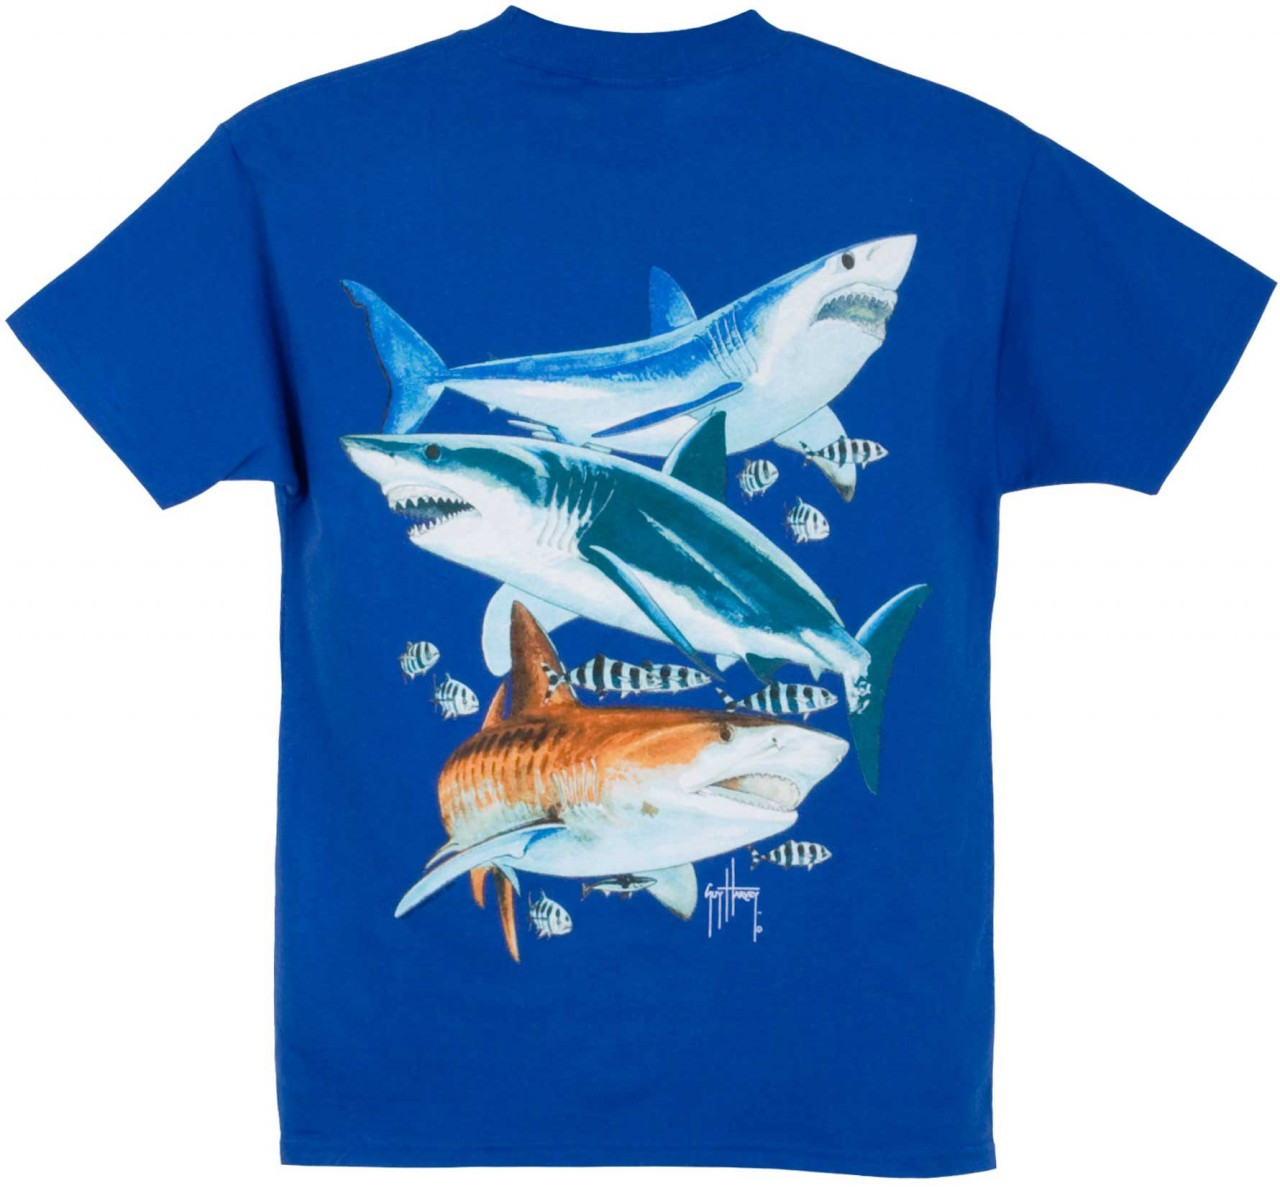 Guy Harvey 3 Sharks Boys Tee Shirt in Yellow, Royal Blue, Red or Lime